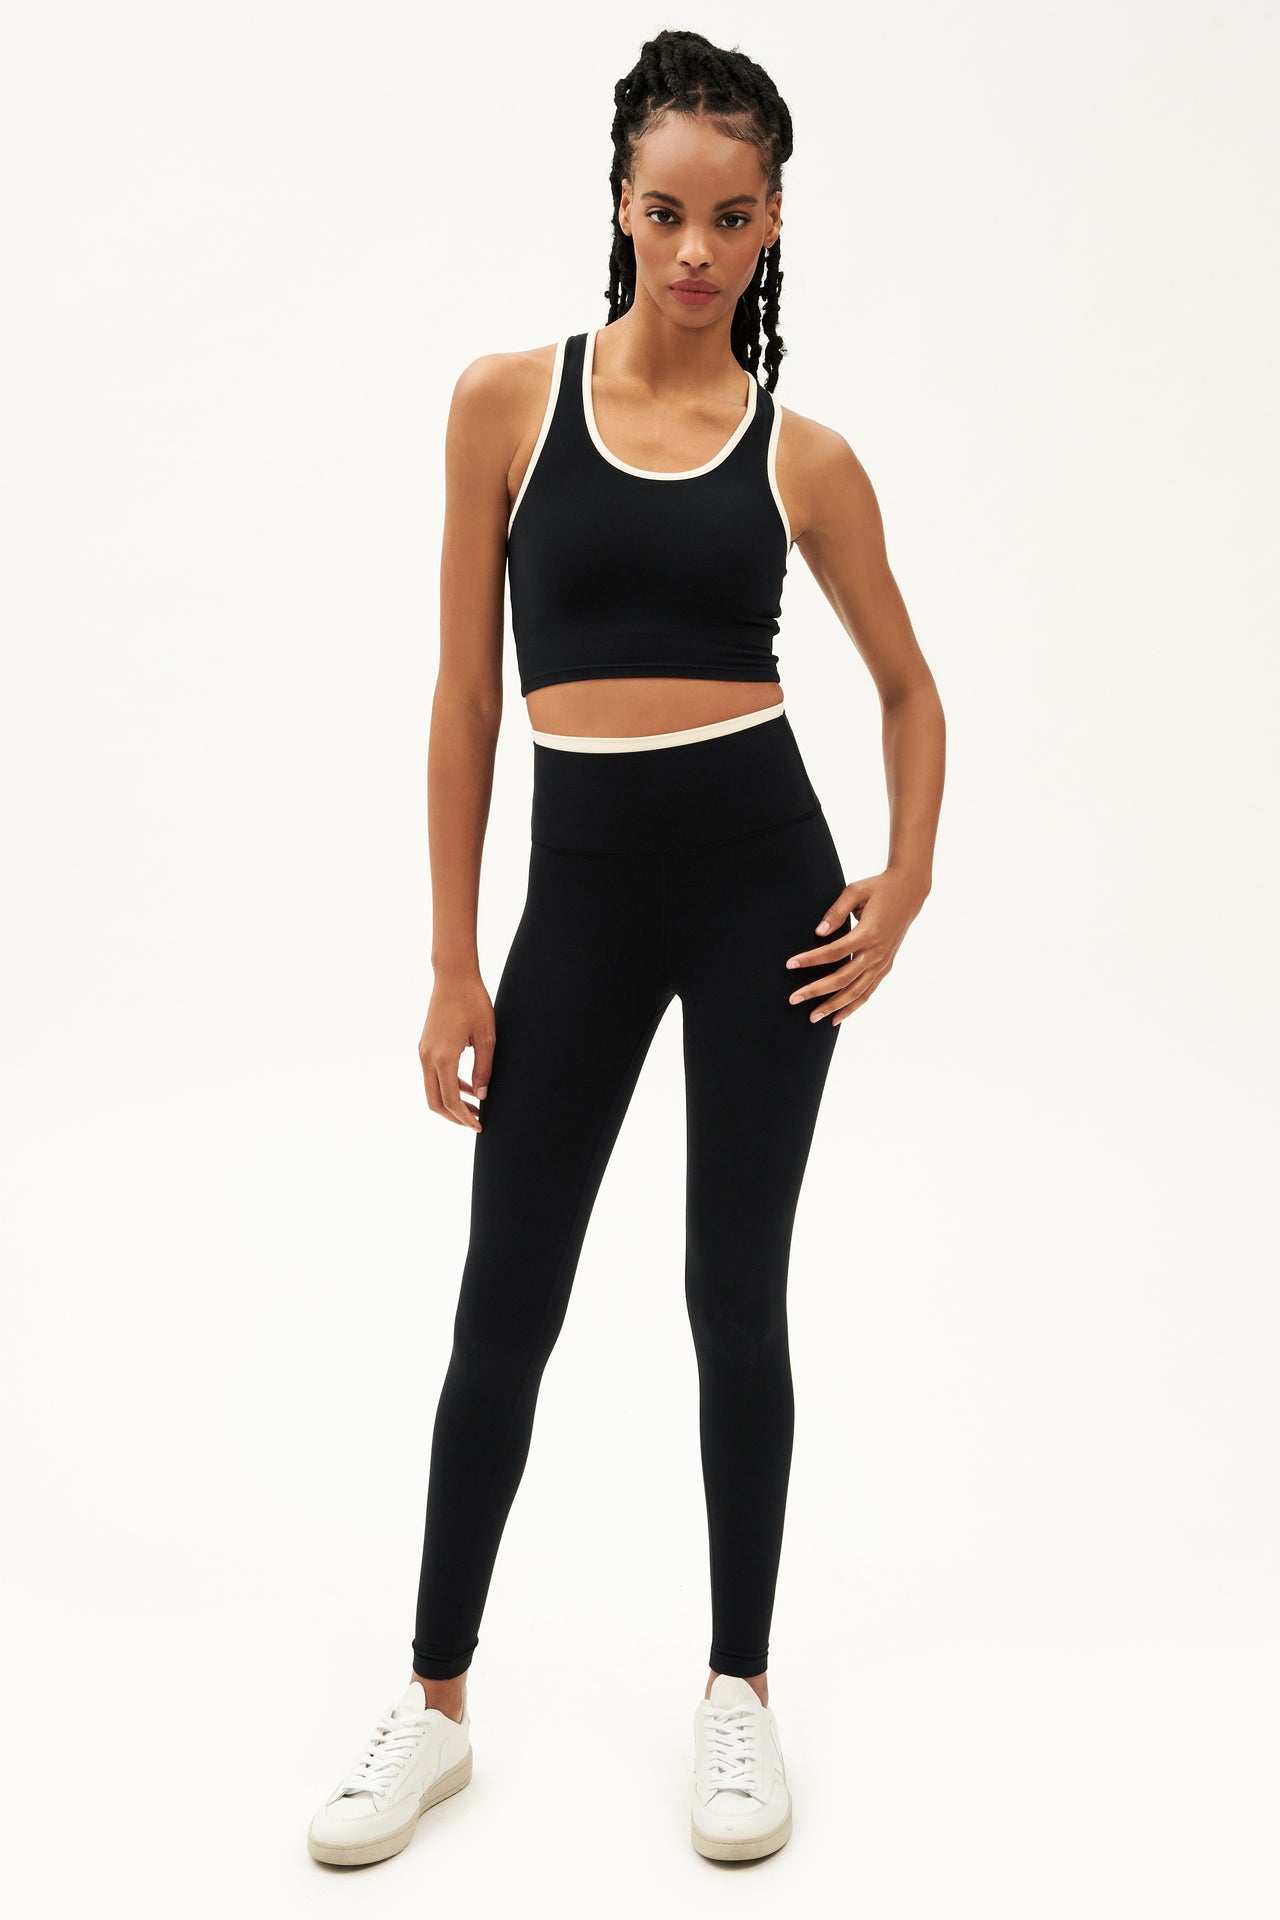 Full front view of girl wearing black leggings with thin white band around waist and black tank top with white shoes